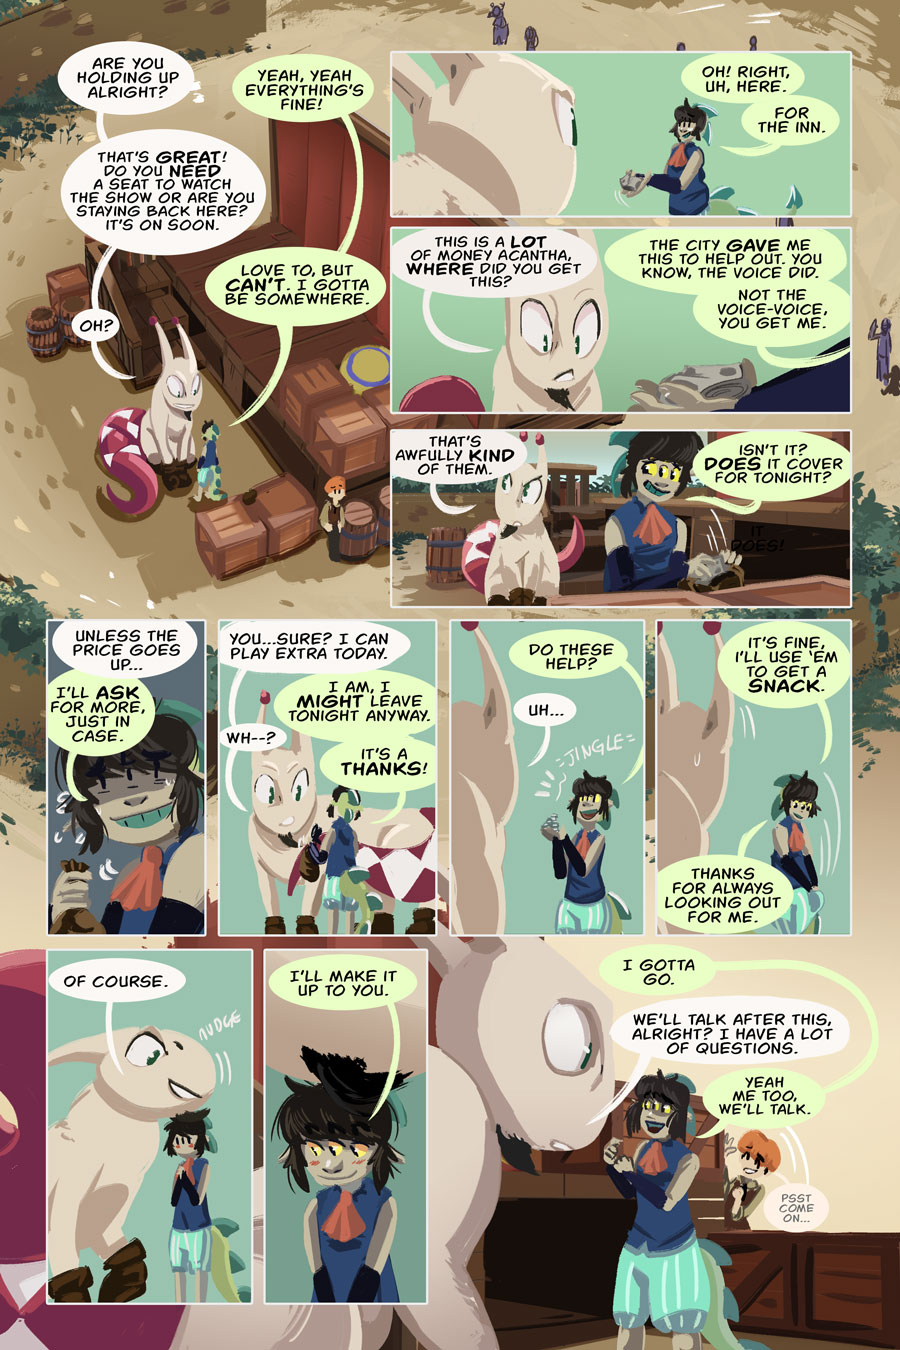 Chapter 8, page 18